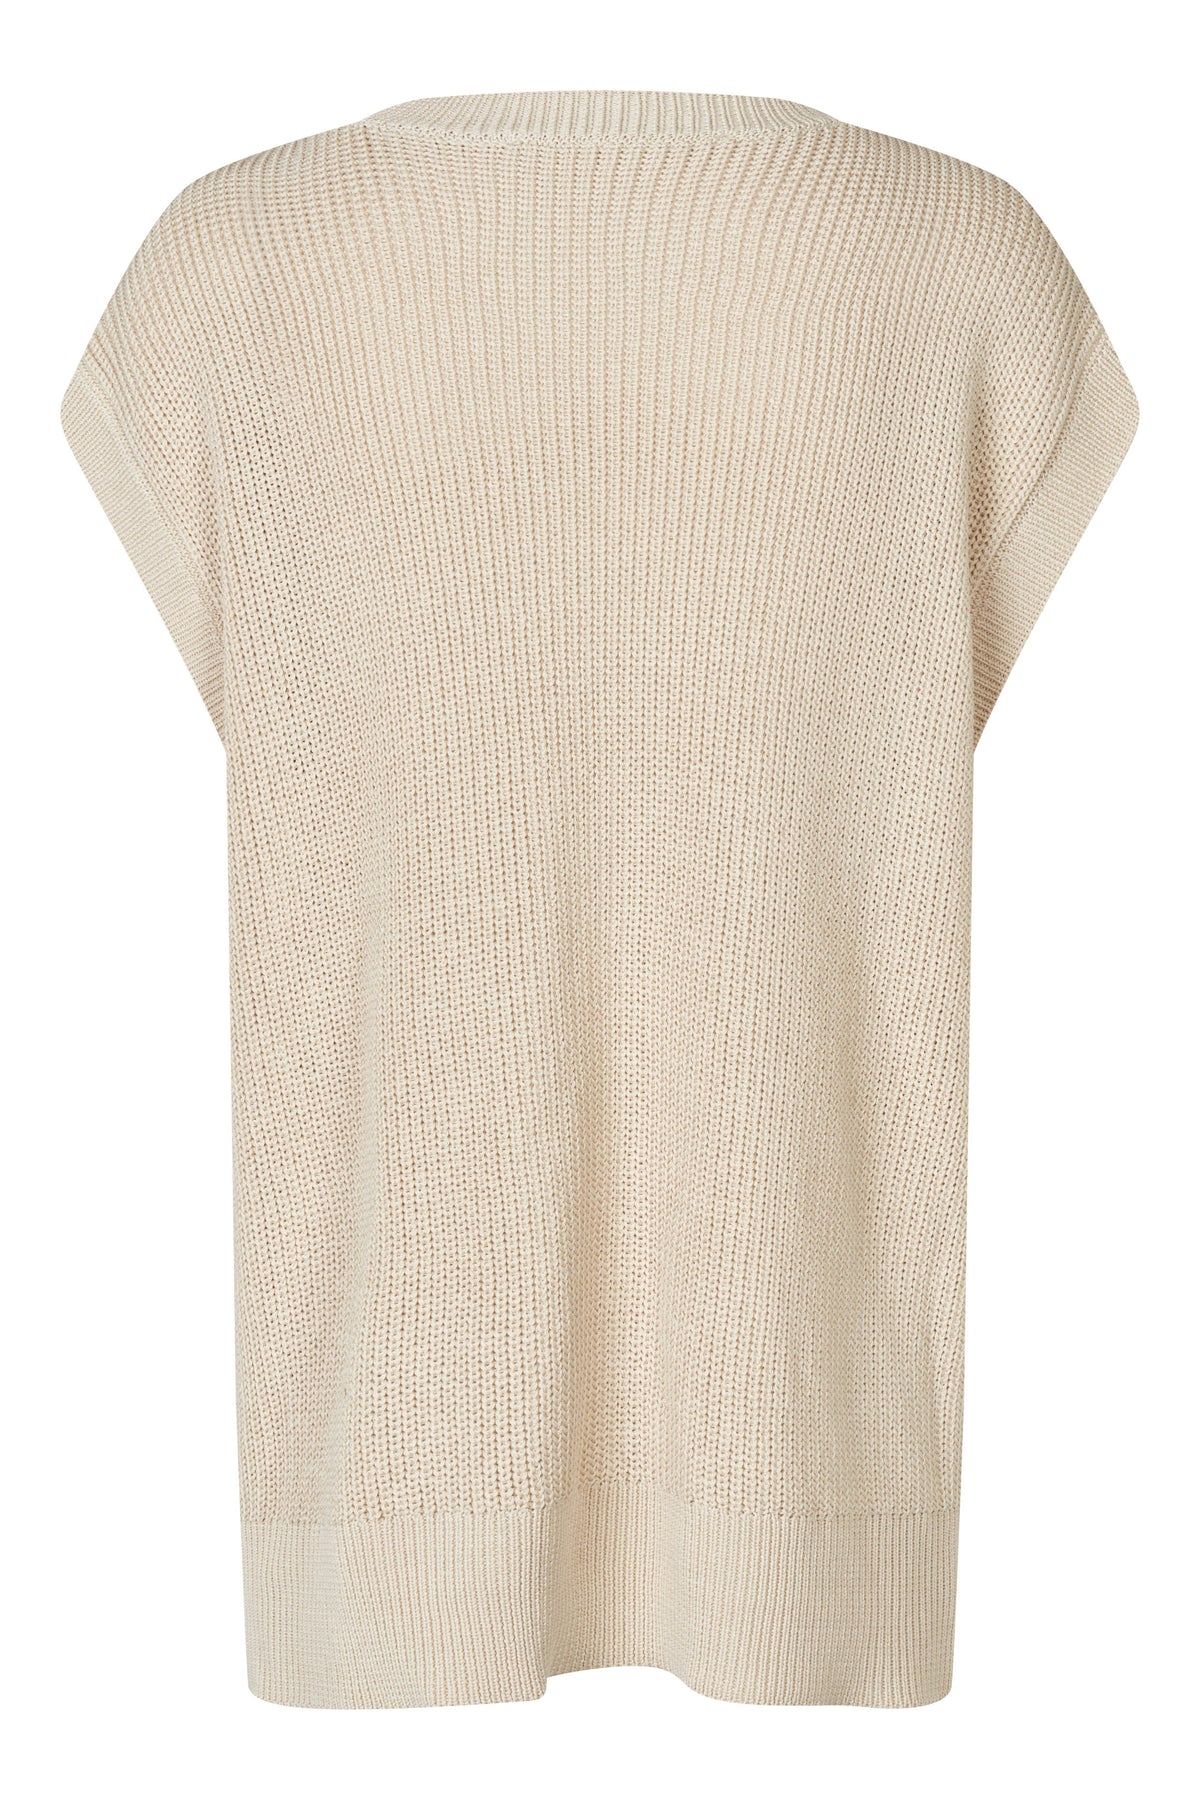 Chunky knit tank top with crew neck in beige